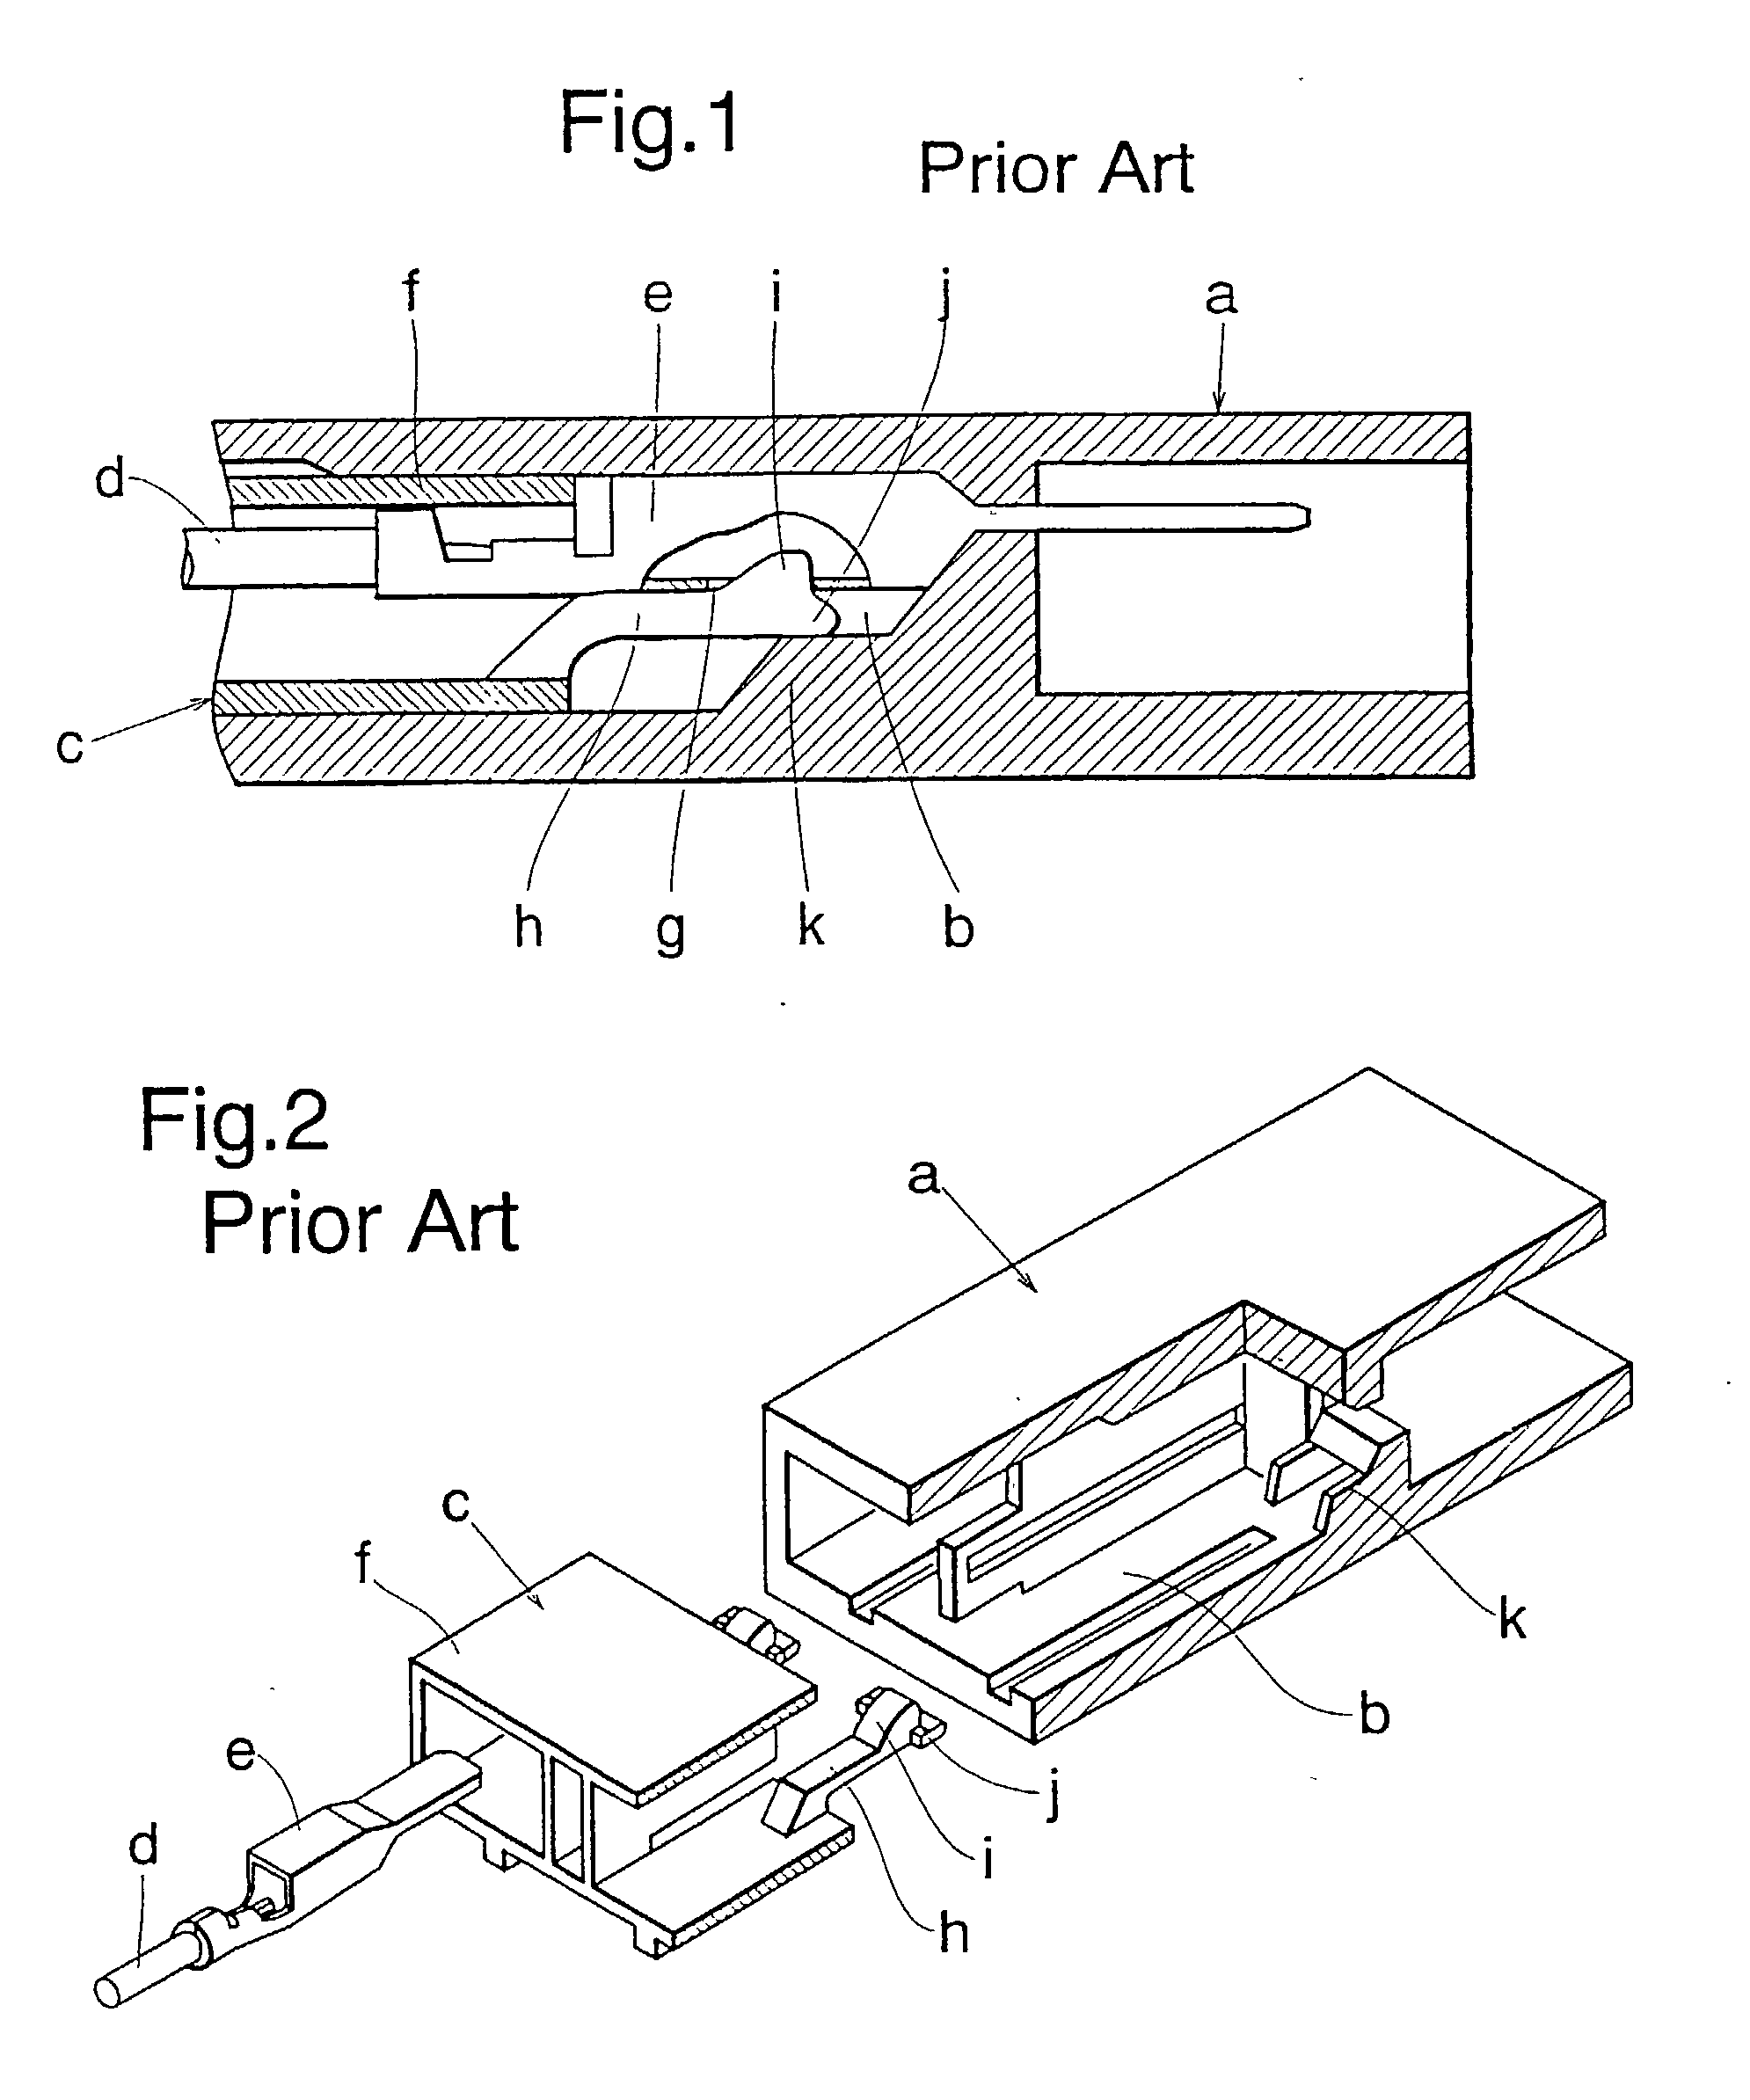 Electric connector permitting testing of electric conductivity of terminals in provisional locking position